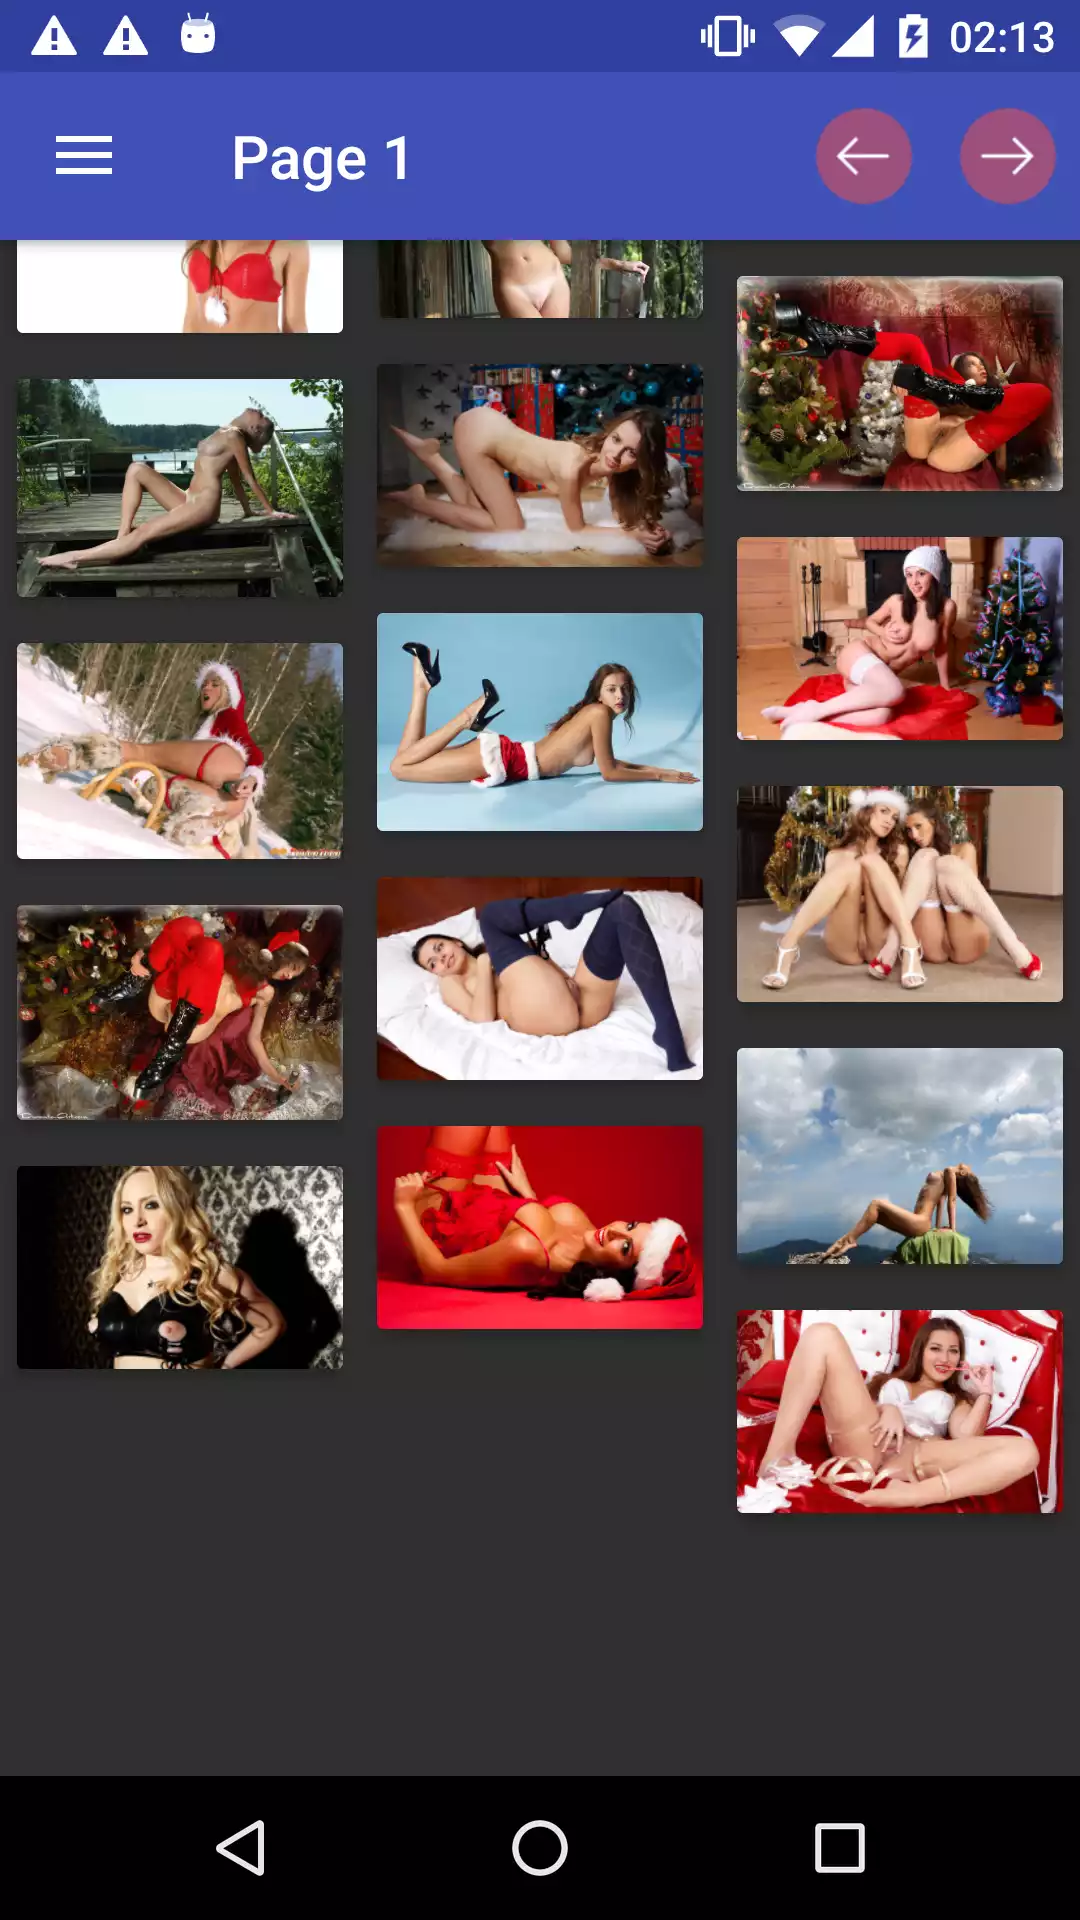 xxx-holidays app,images,mature,hentai,pictures,pornstar,photo,backgrounds,pics,gallery,for,manga,android,apps,download,image,sexy,latest,hentay,wallpapers,kristinf,best,henati